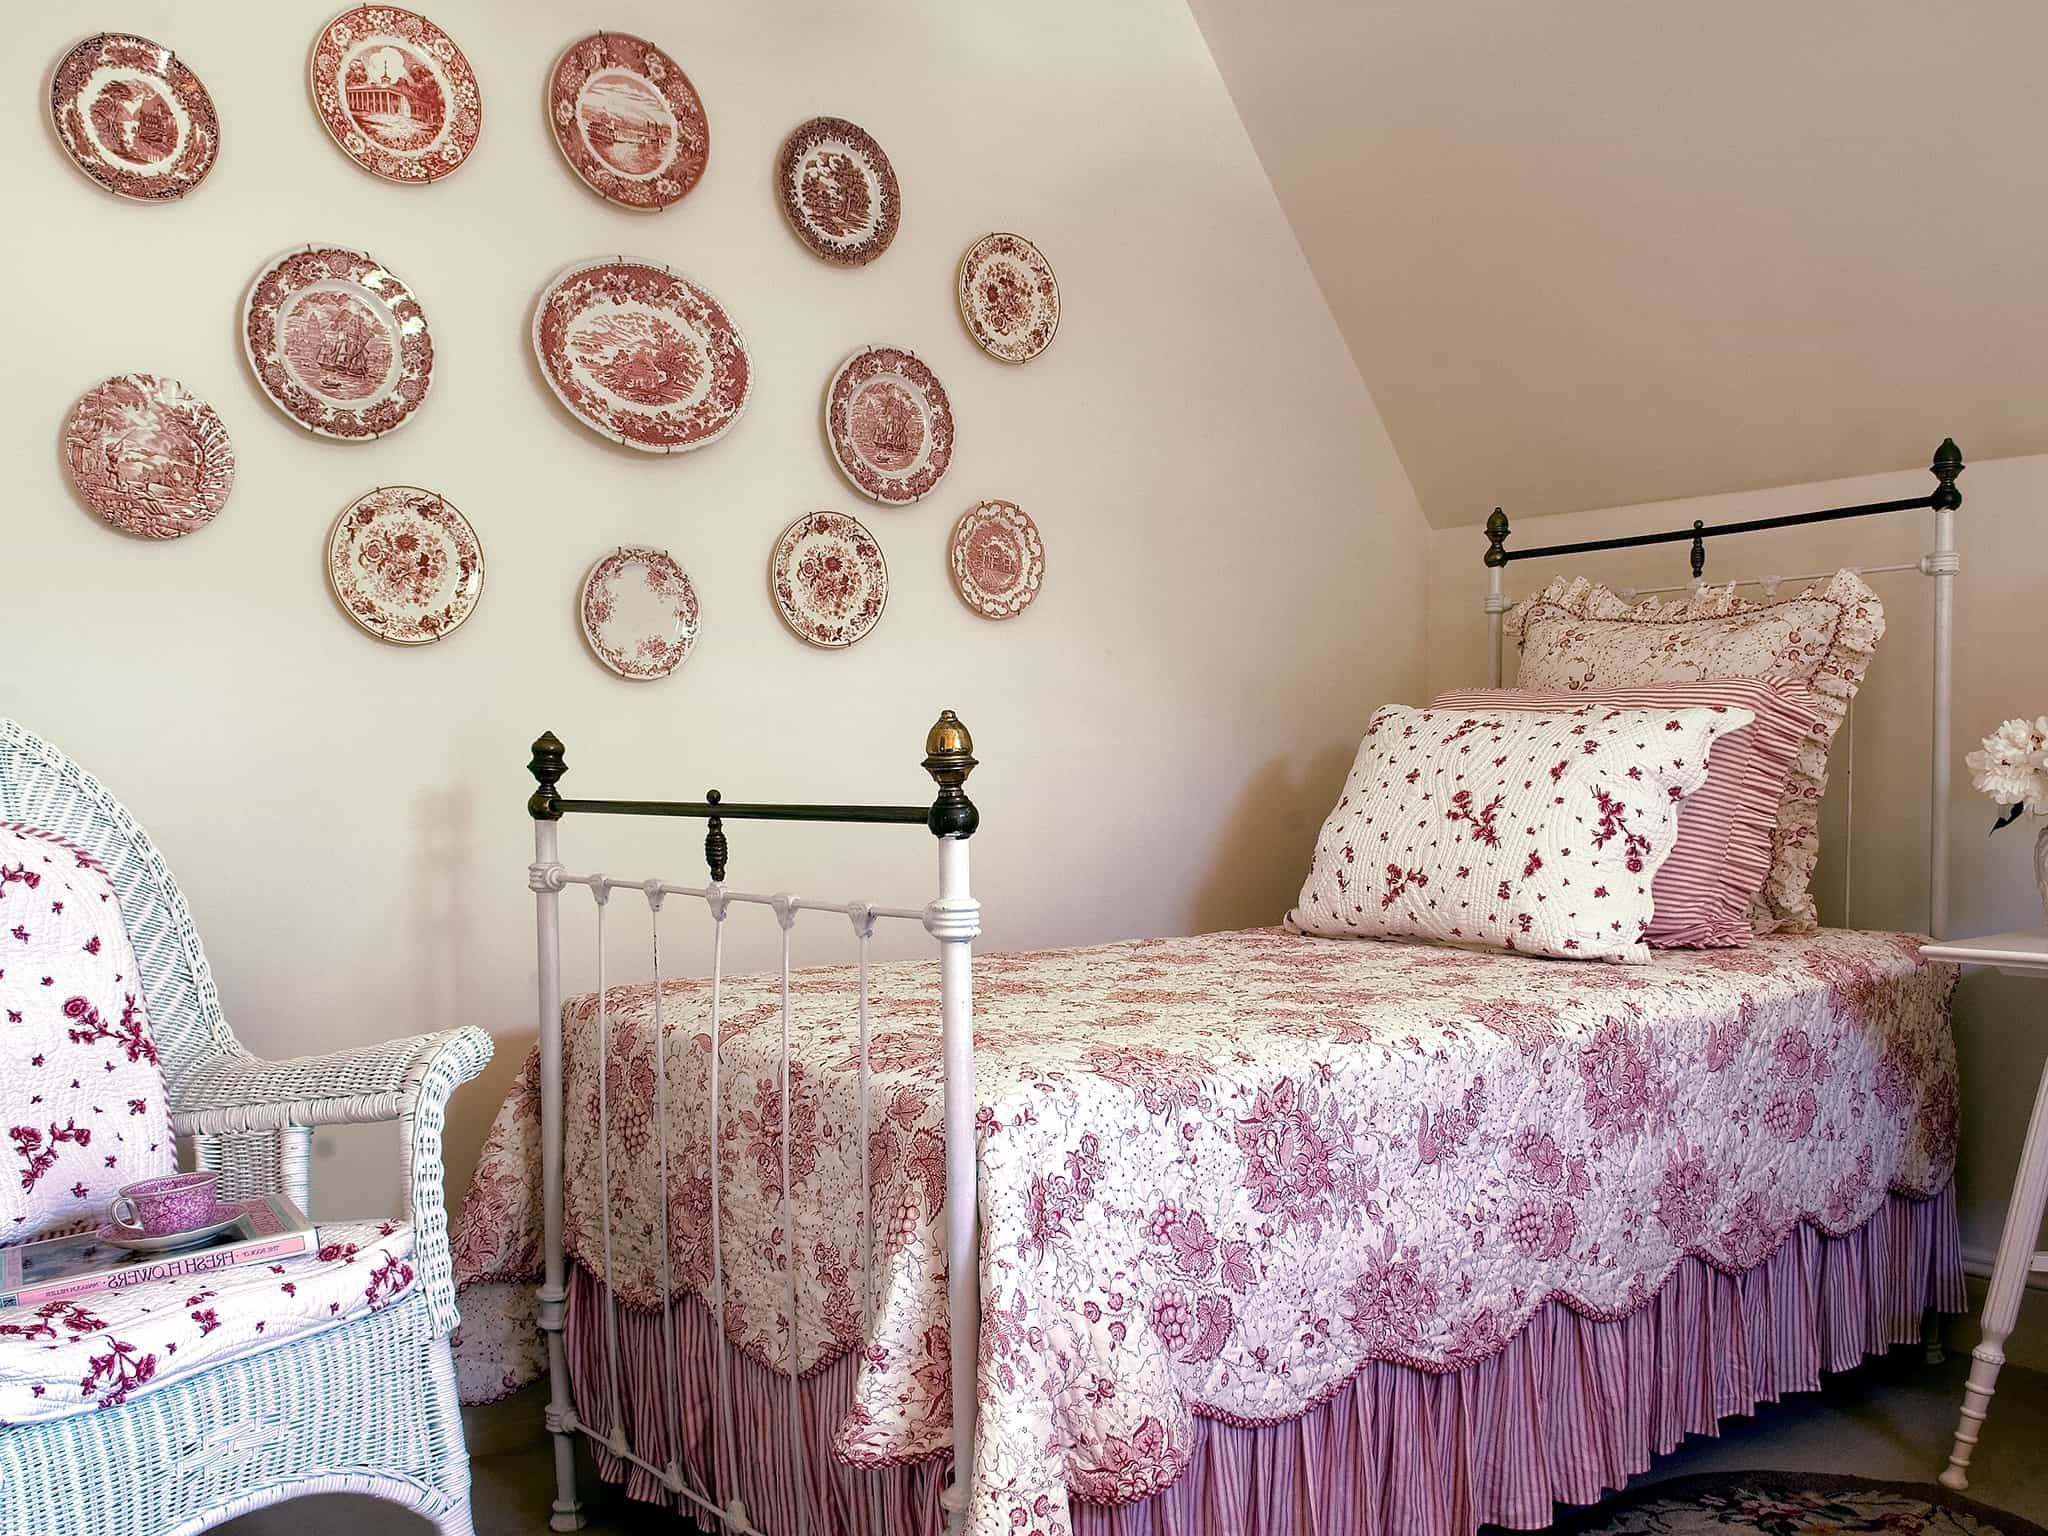 Pink Shabby Chic Small Bedroom With Beauty Wall Decor Accessories (View 17 of 20)